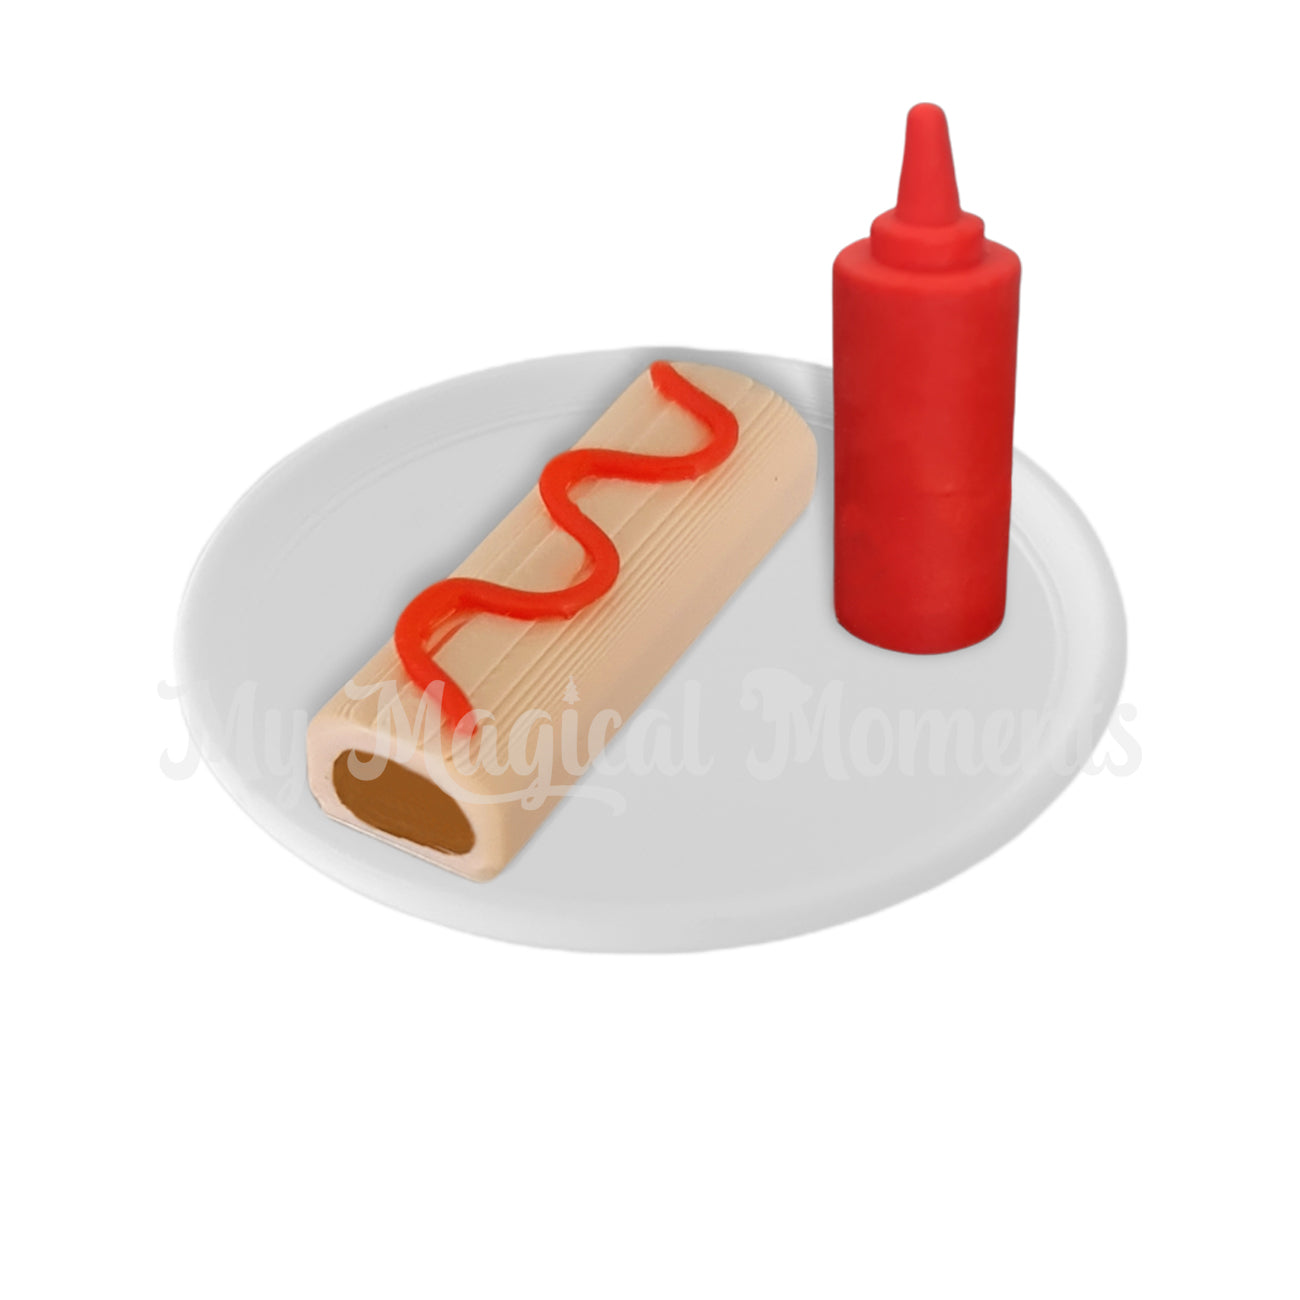 Miniature sausage roll on a plate with sauce